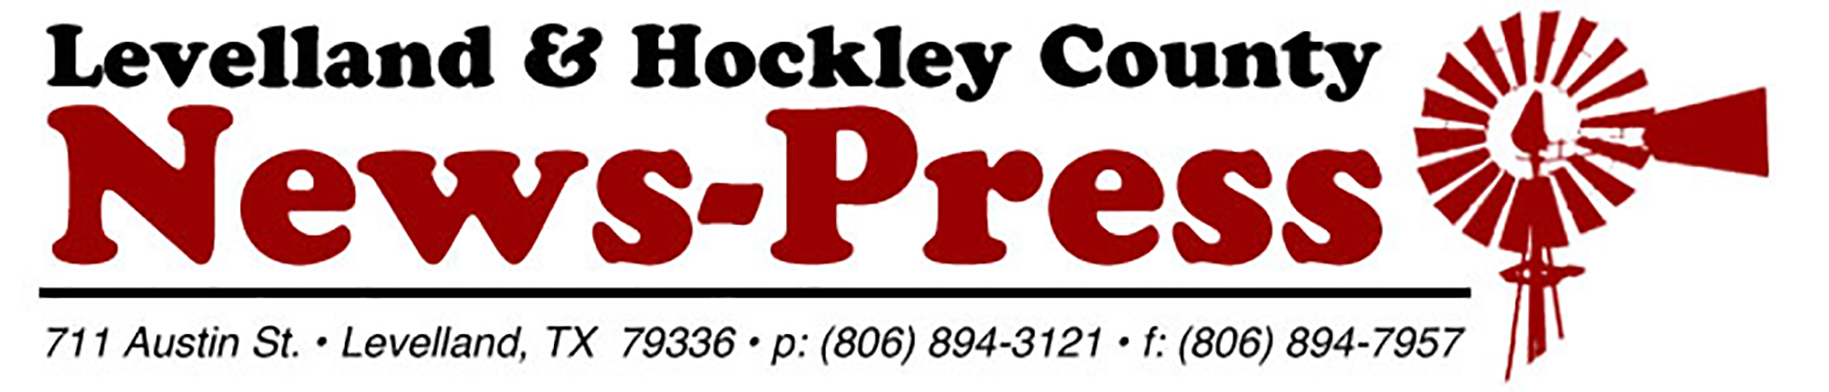 Levelland & Hockley County News Press Home